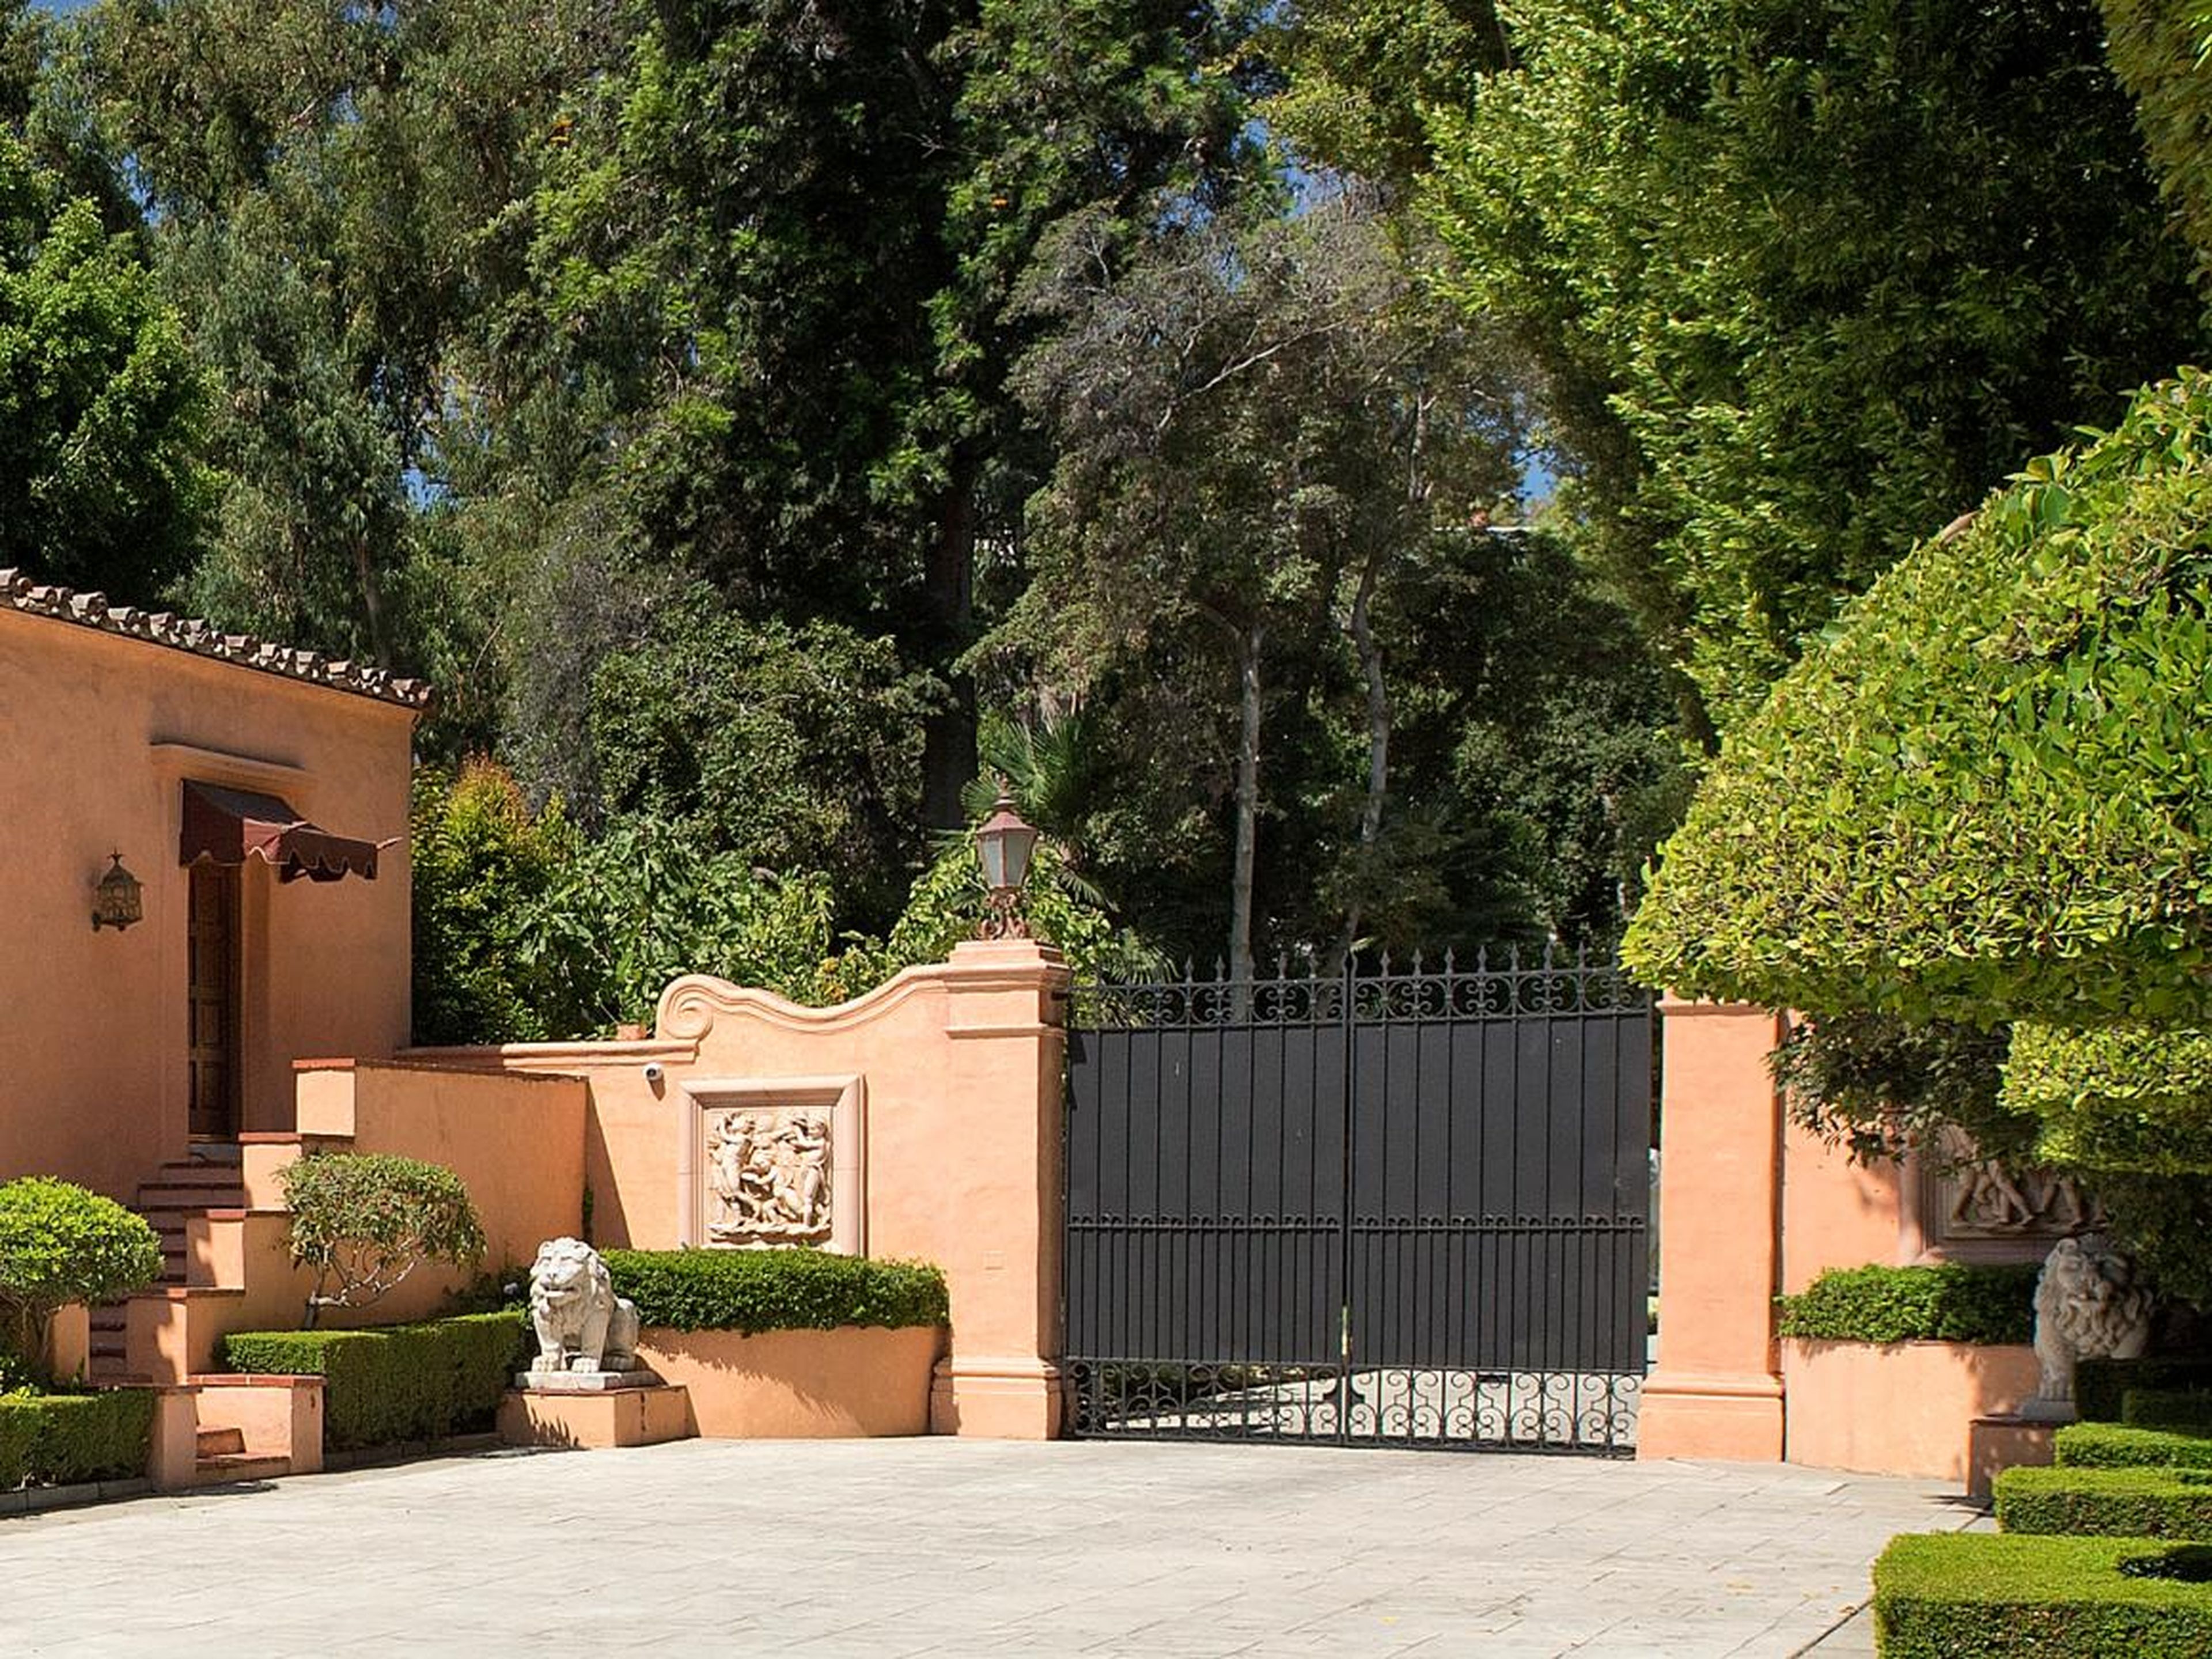 Visitors to the estate will have to go through a wrought-iron gate and up the 800-foot driveway.